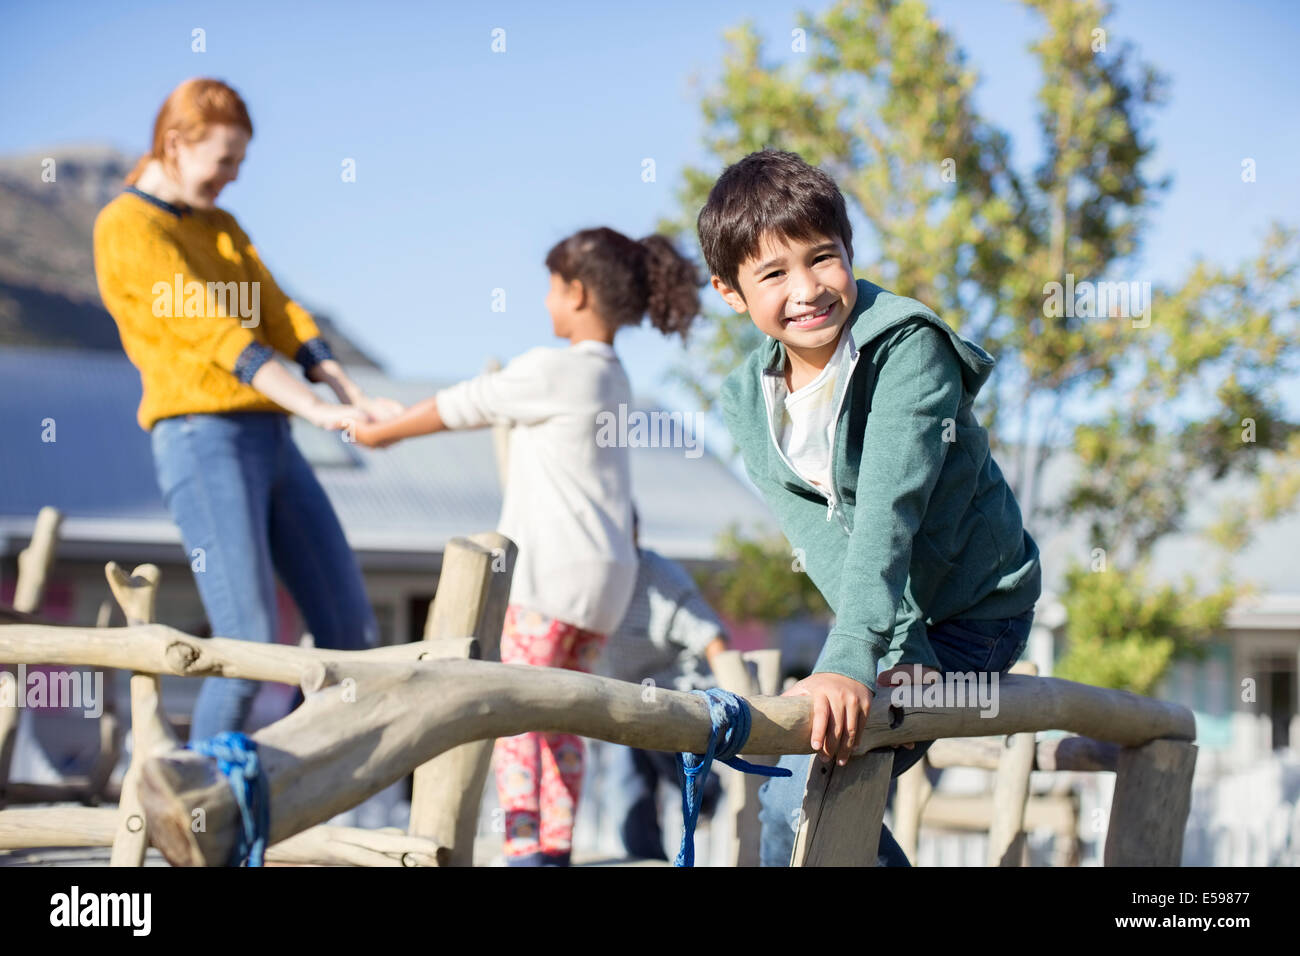 Teacher and students playing outdoors Stock Photo